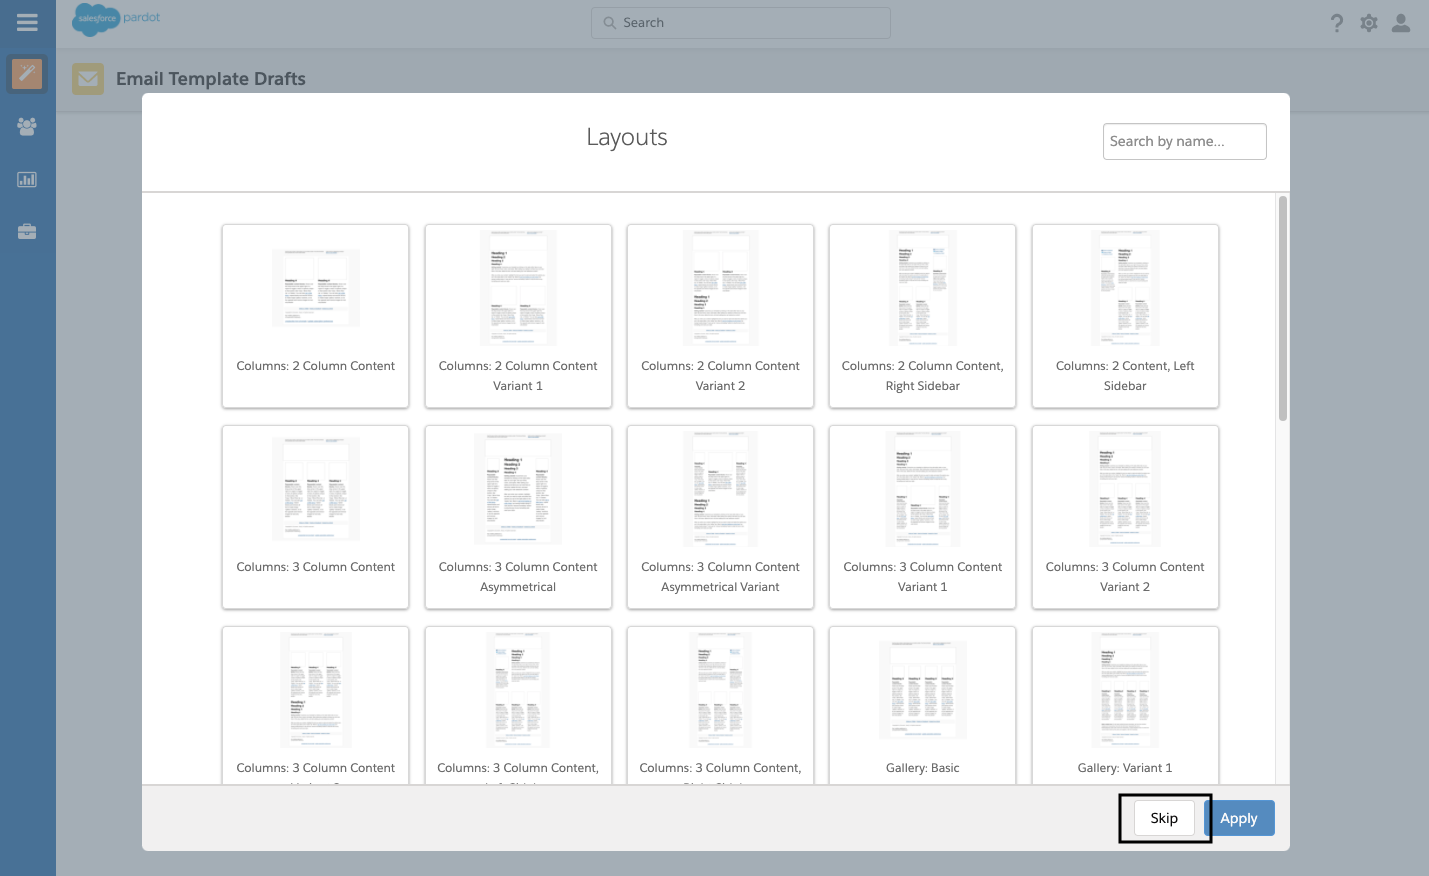 Pardot layouts screen. Skip this section